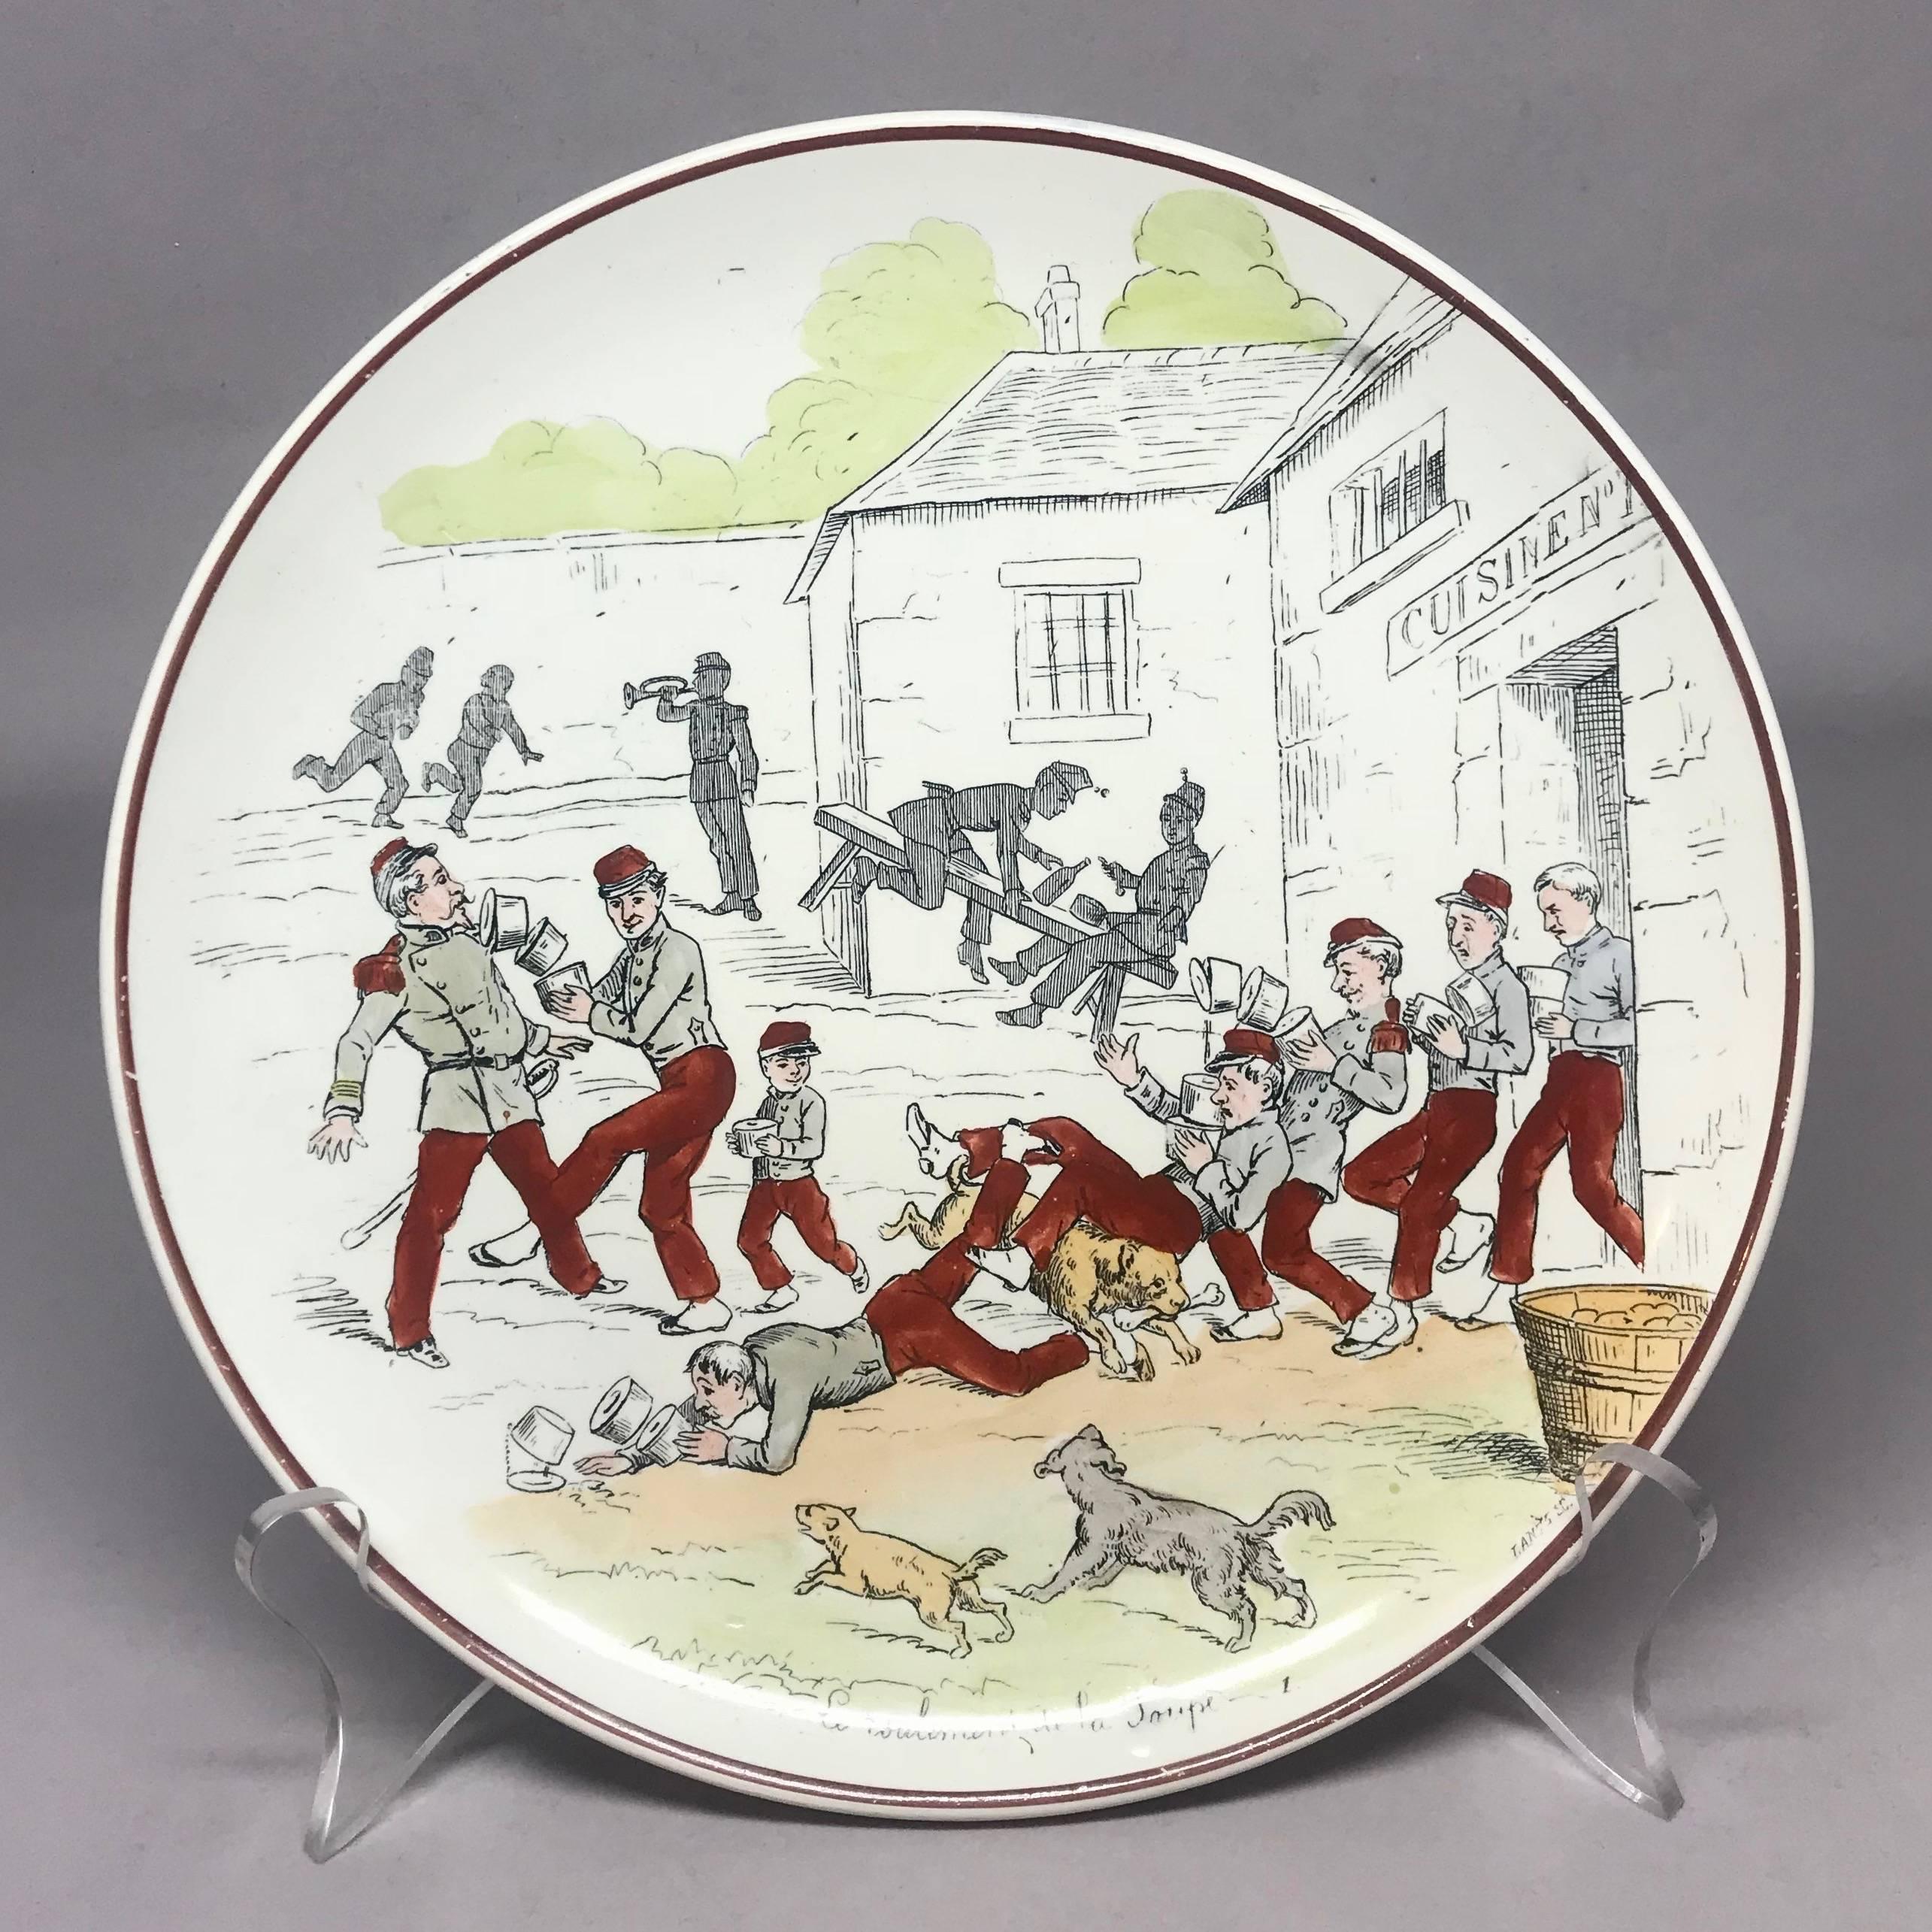 Set of ten French creamware military plates. Charming individually painted luncheon or dessert plates with military scenes from the time of Napoleon III; with markings for Creil et Montereau and Vie de Caserne on the reverse, France, late 19th